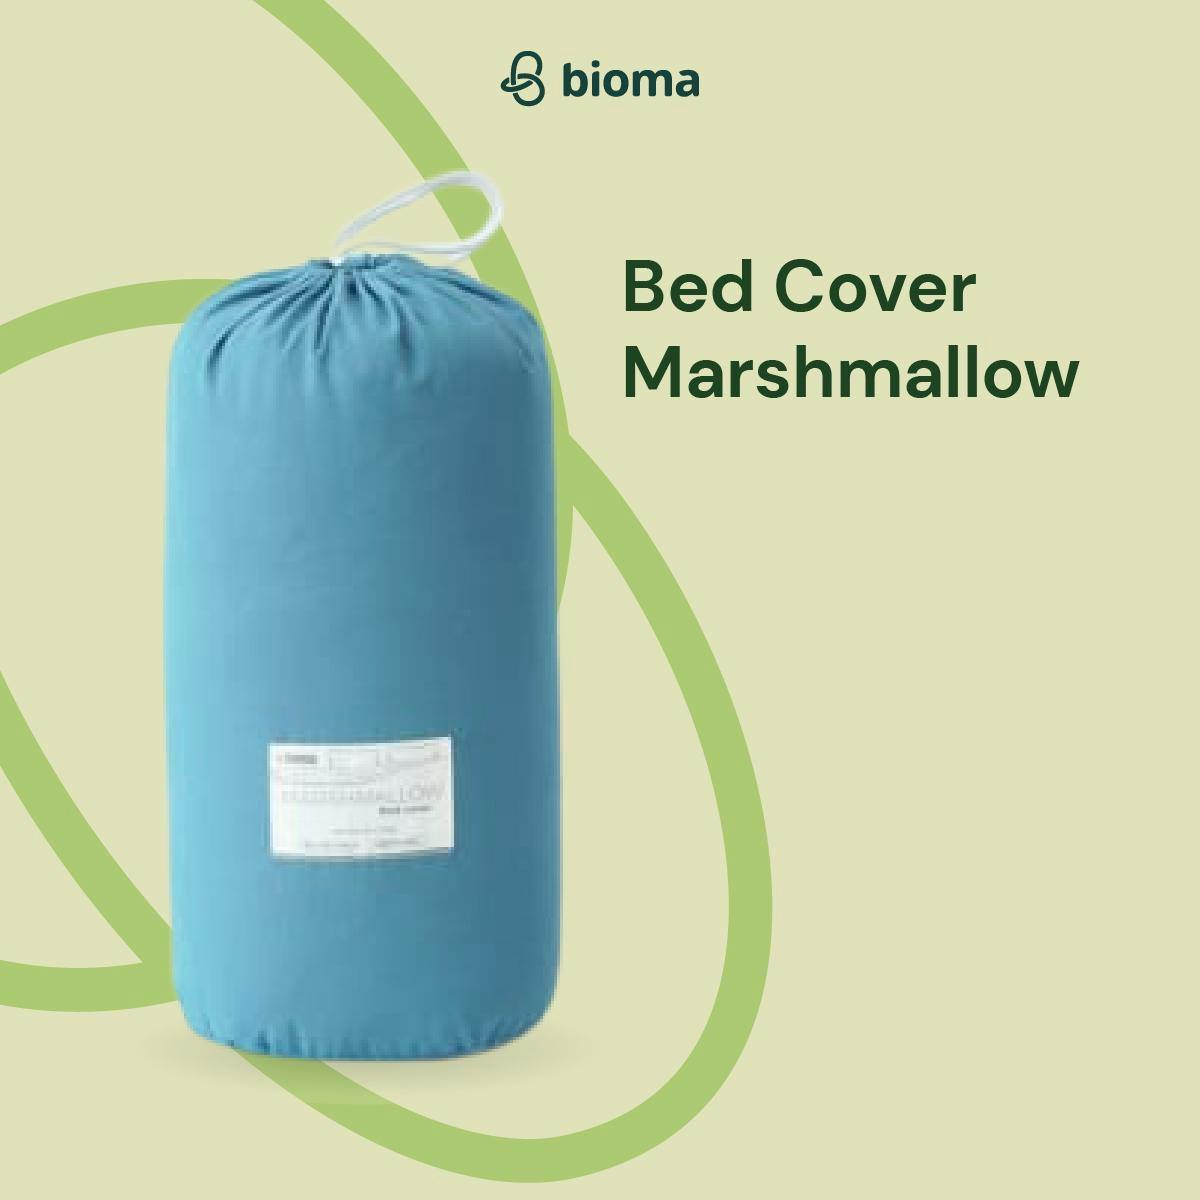 Bed Cover Marshmallow